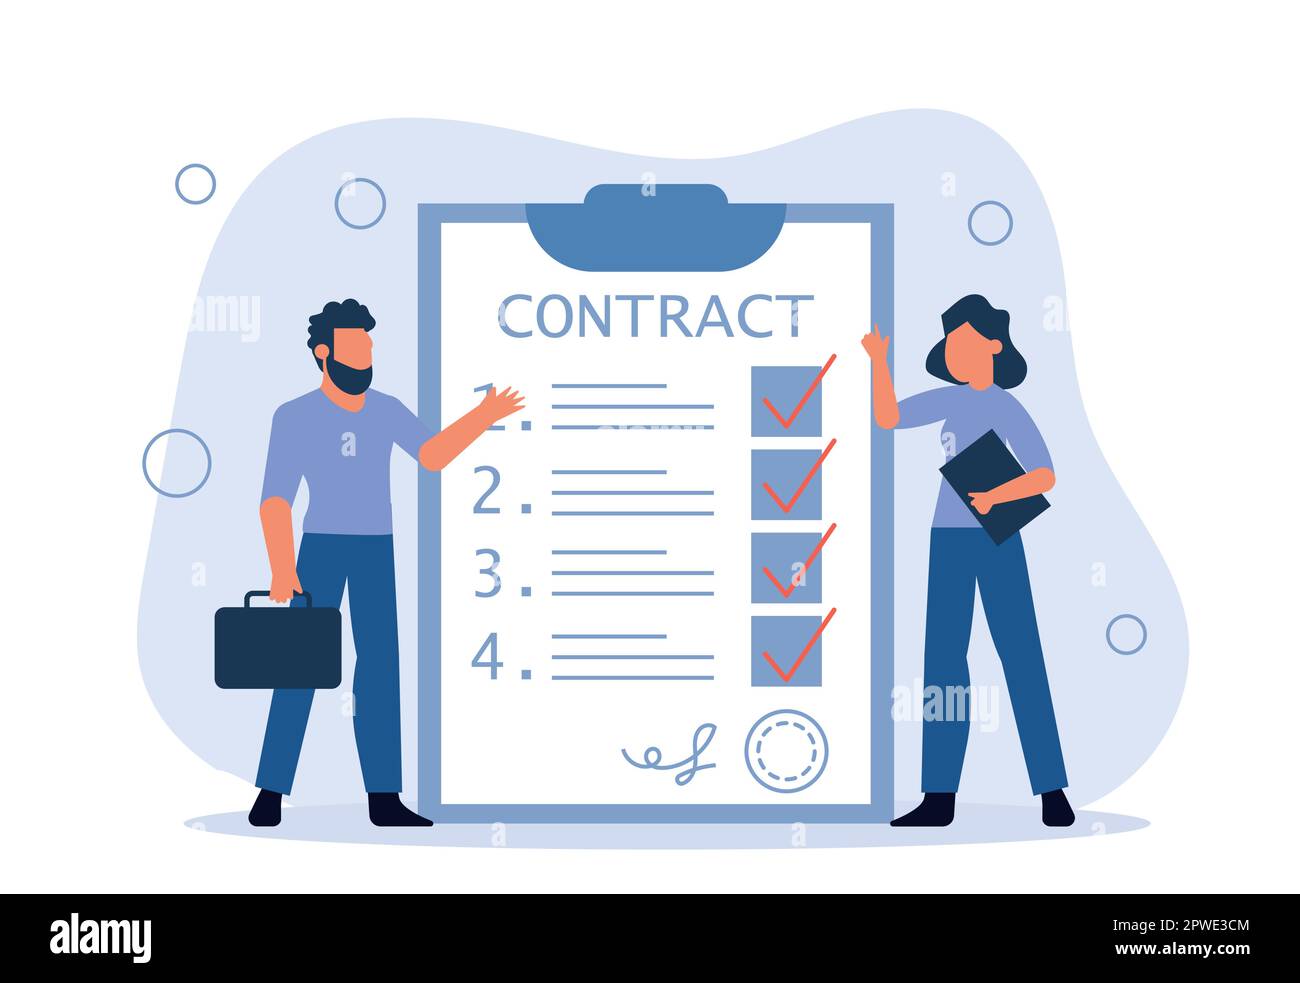 A contractual agreement between an employee and an employer. A man arranges a job and signs a contract. A job or a deal between people. Vector illustr Stock Vector